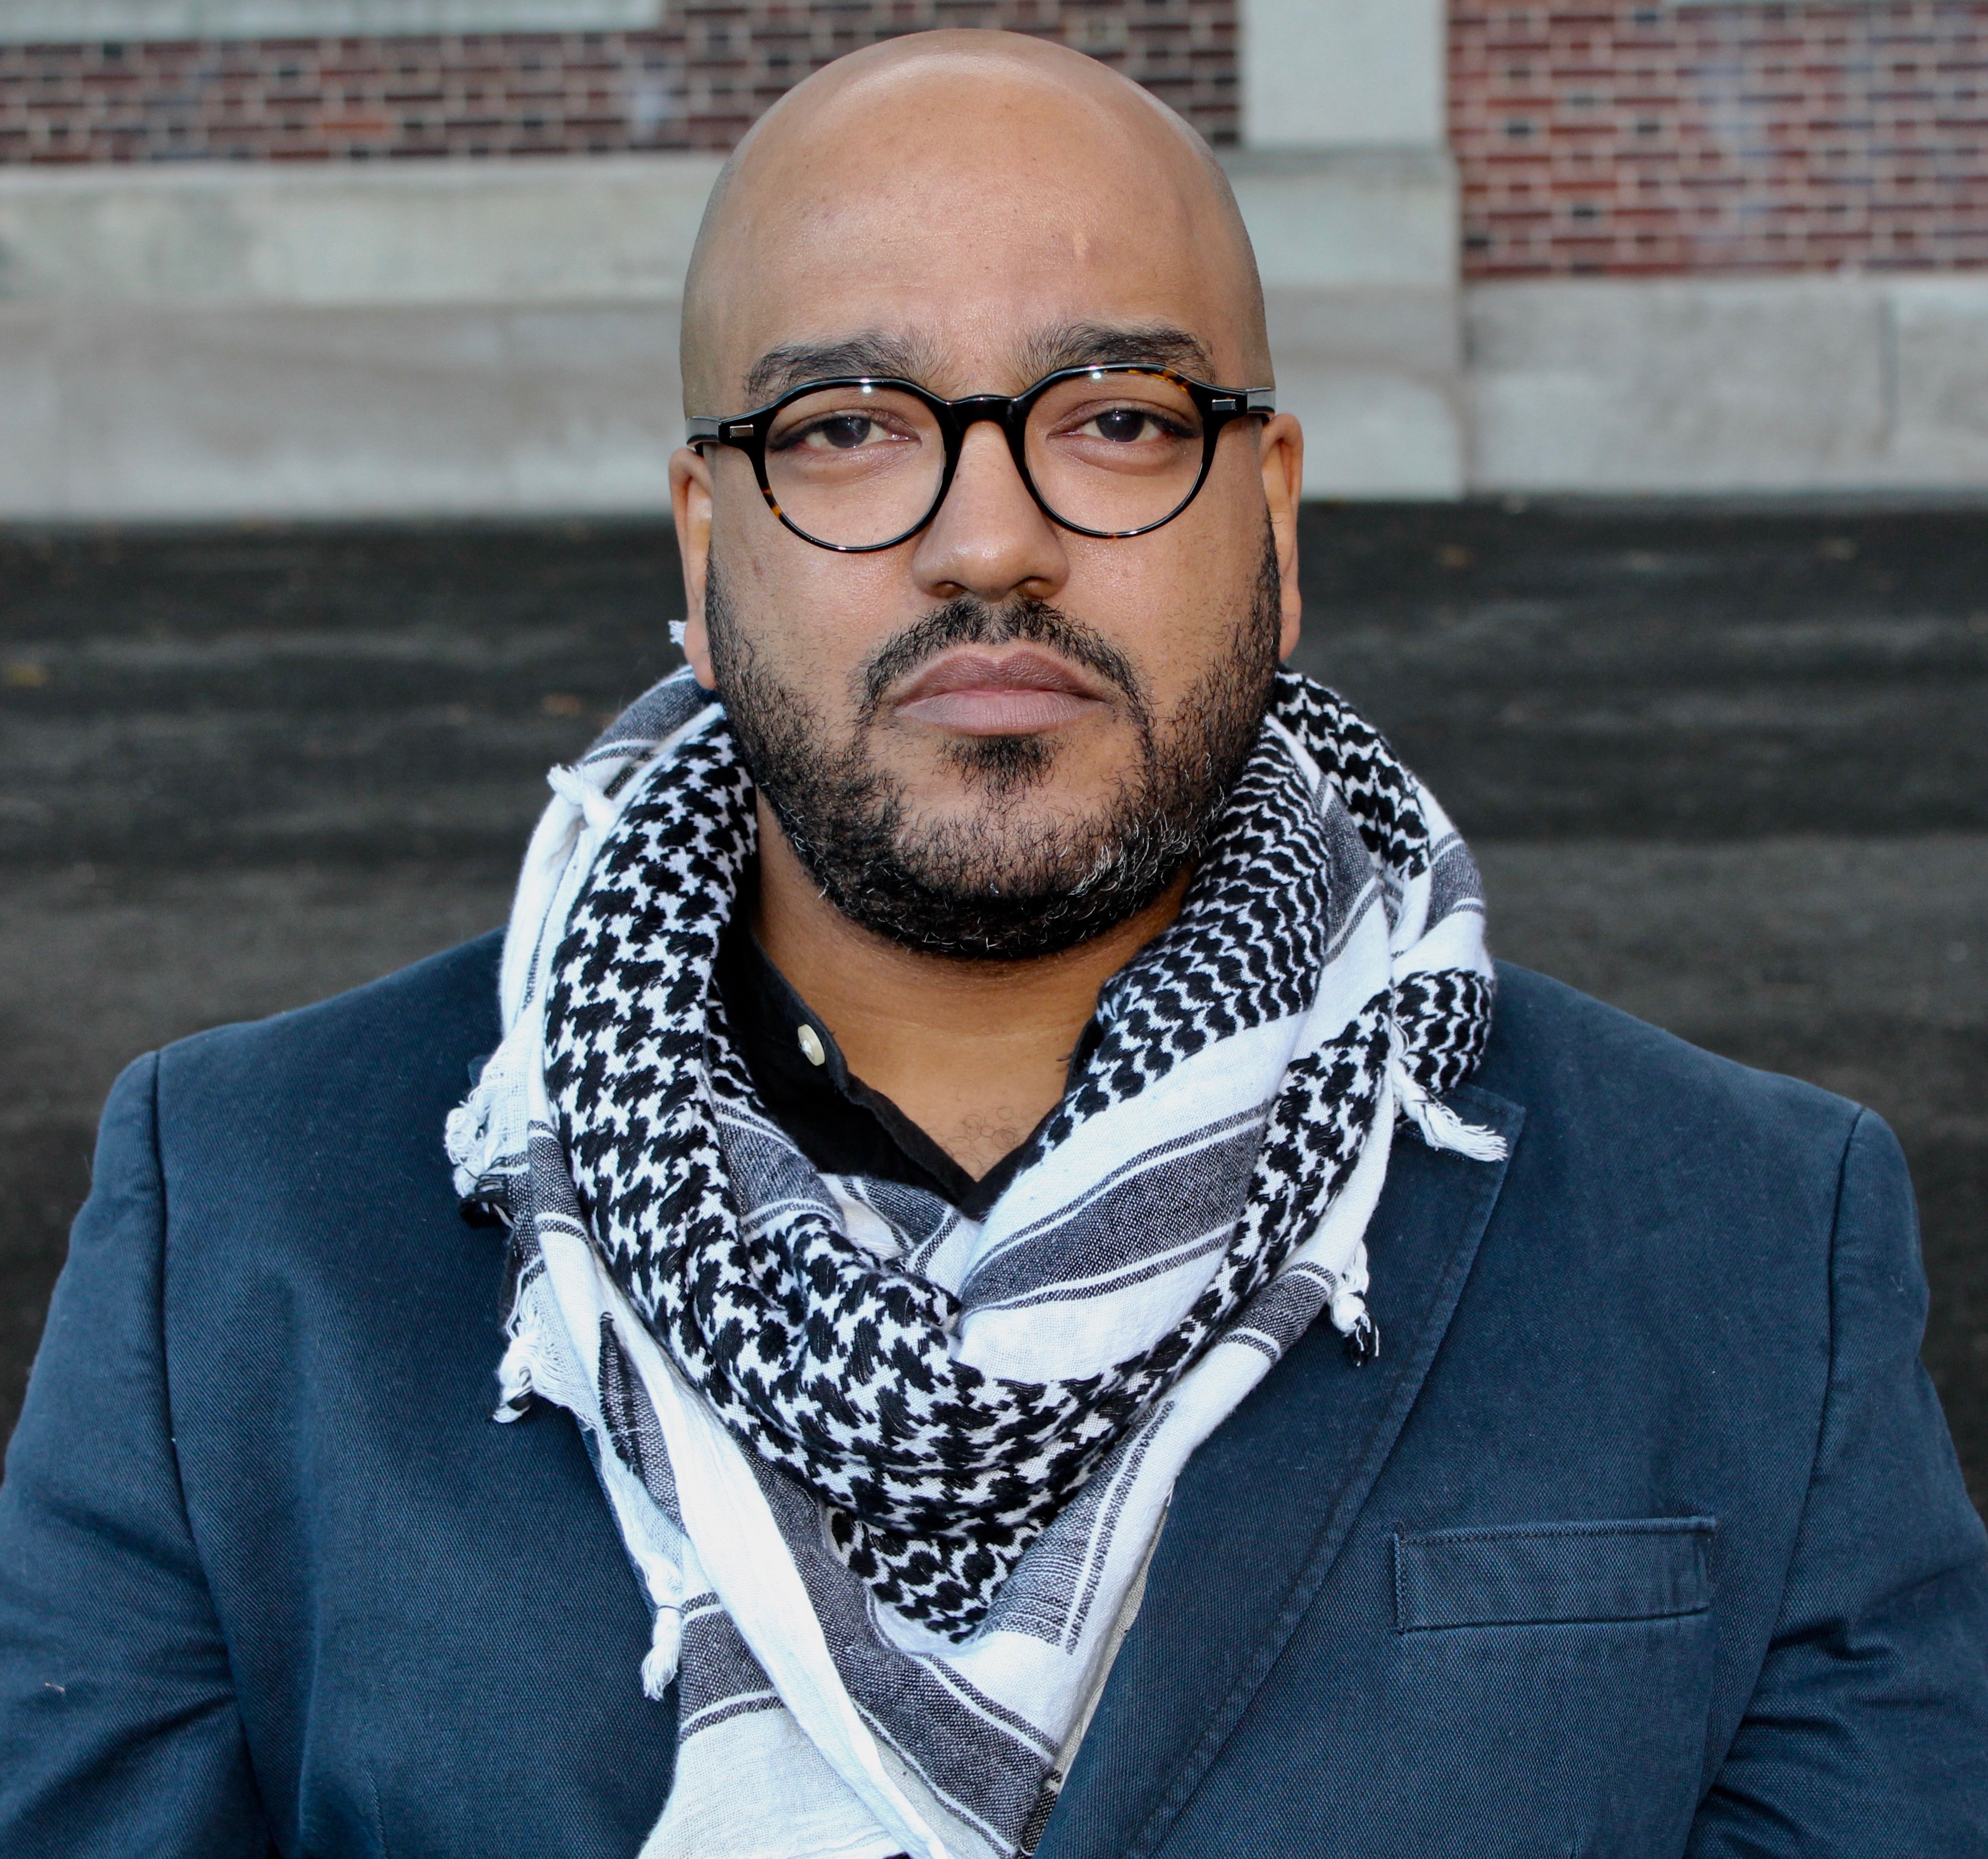 Photo of author staring seriously into the camera, wearing glasses, a blazer, and a keffiyeh. There is a brick wall in the background.